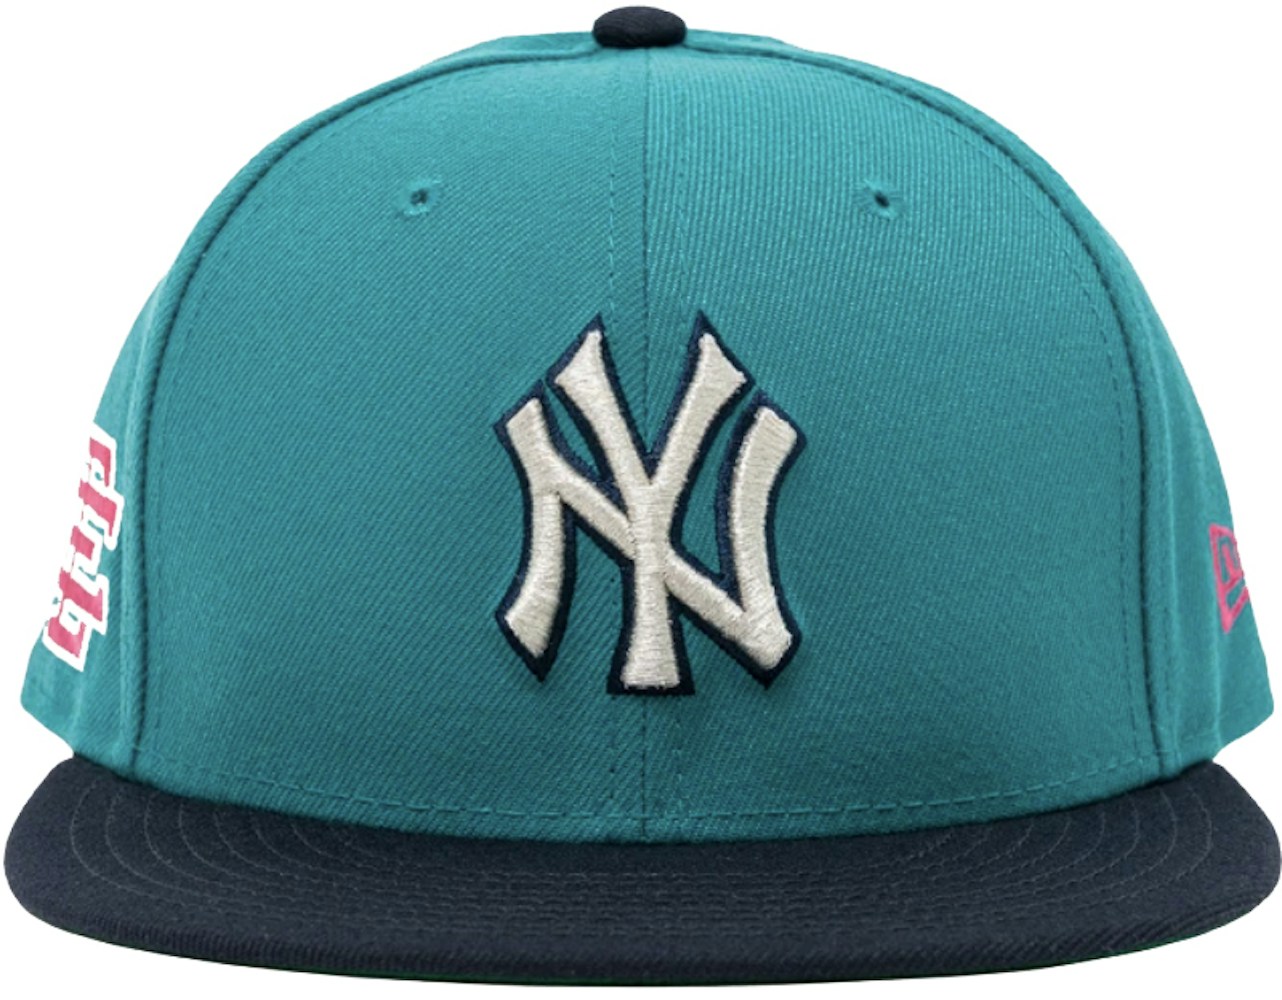 Eric Emanuel EE NY 59/50 Hat Seattle Yankees - SS21